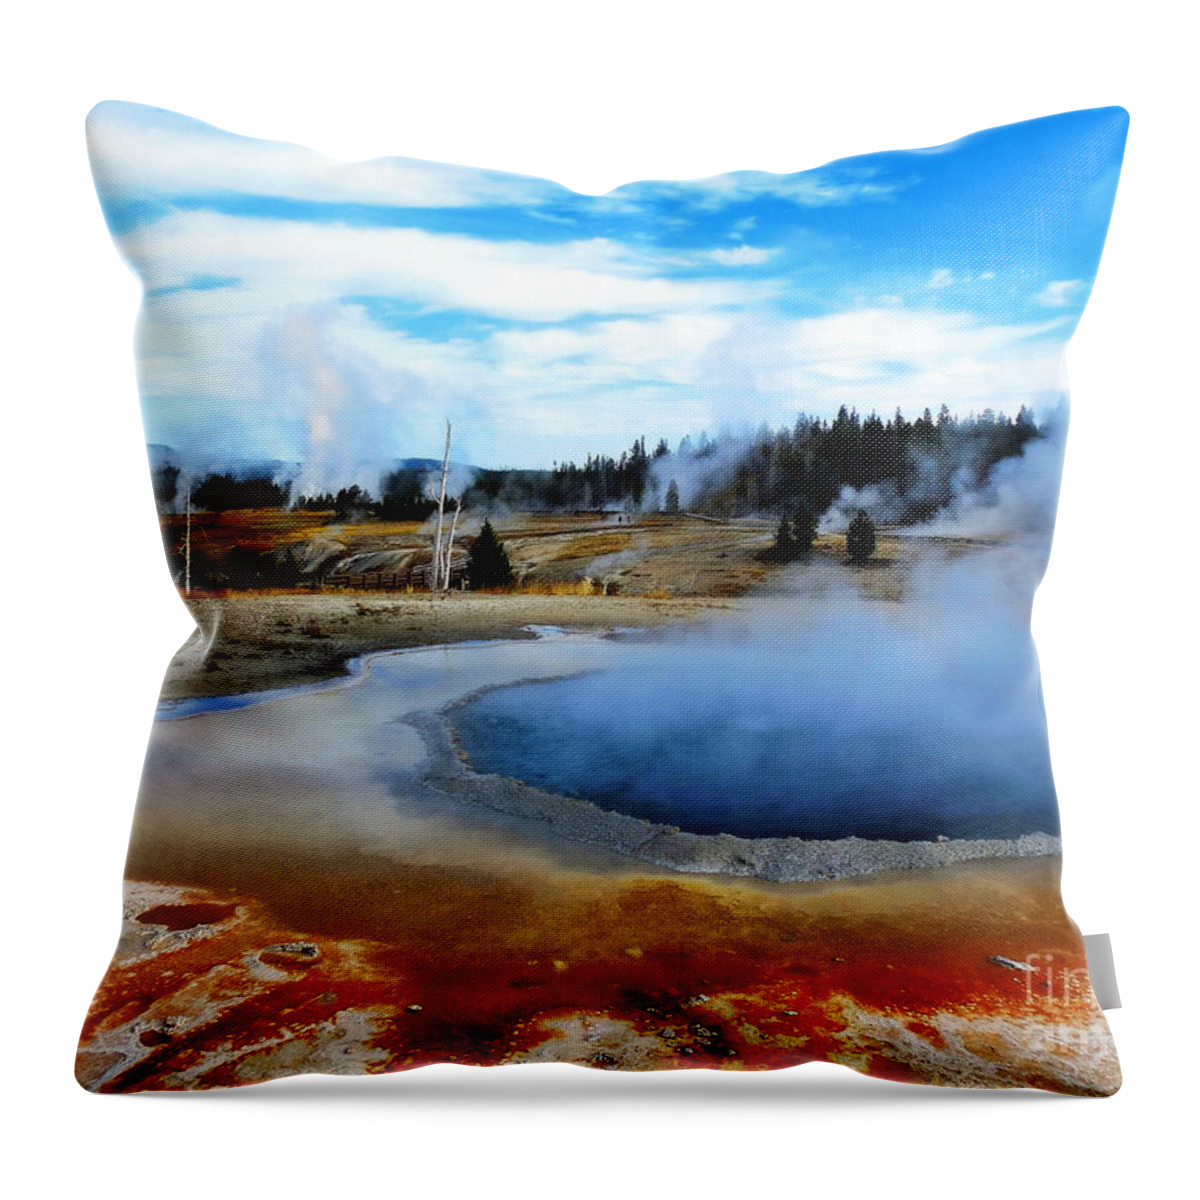 Upper Geyser Basin Throw Pillow featuring the photograph Beauty Pool in Upper Geyser Basin in Yellowstone National Park by Catherine Sherman